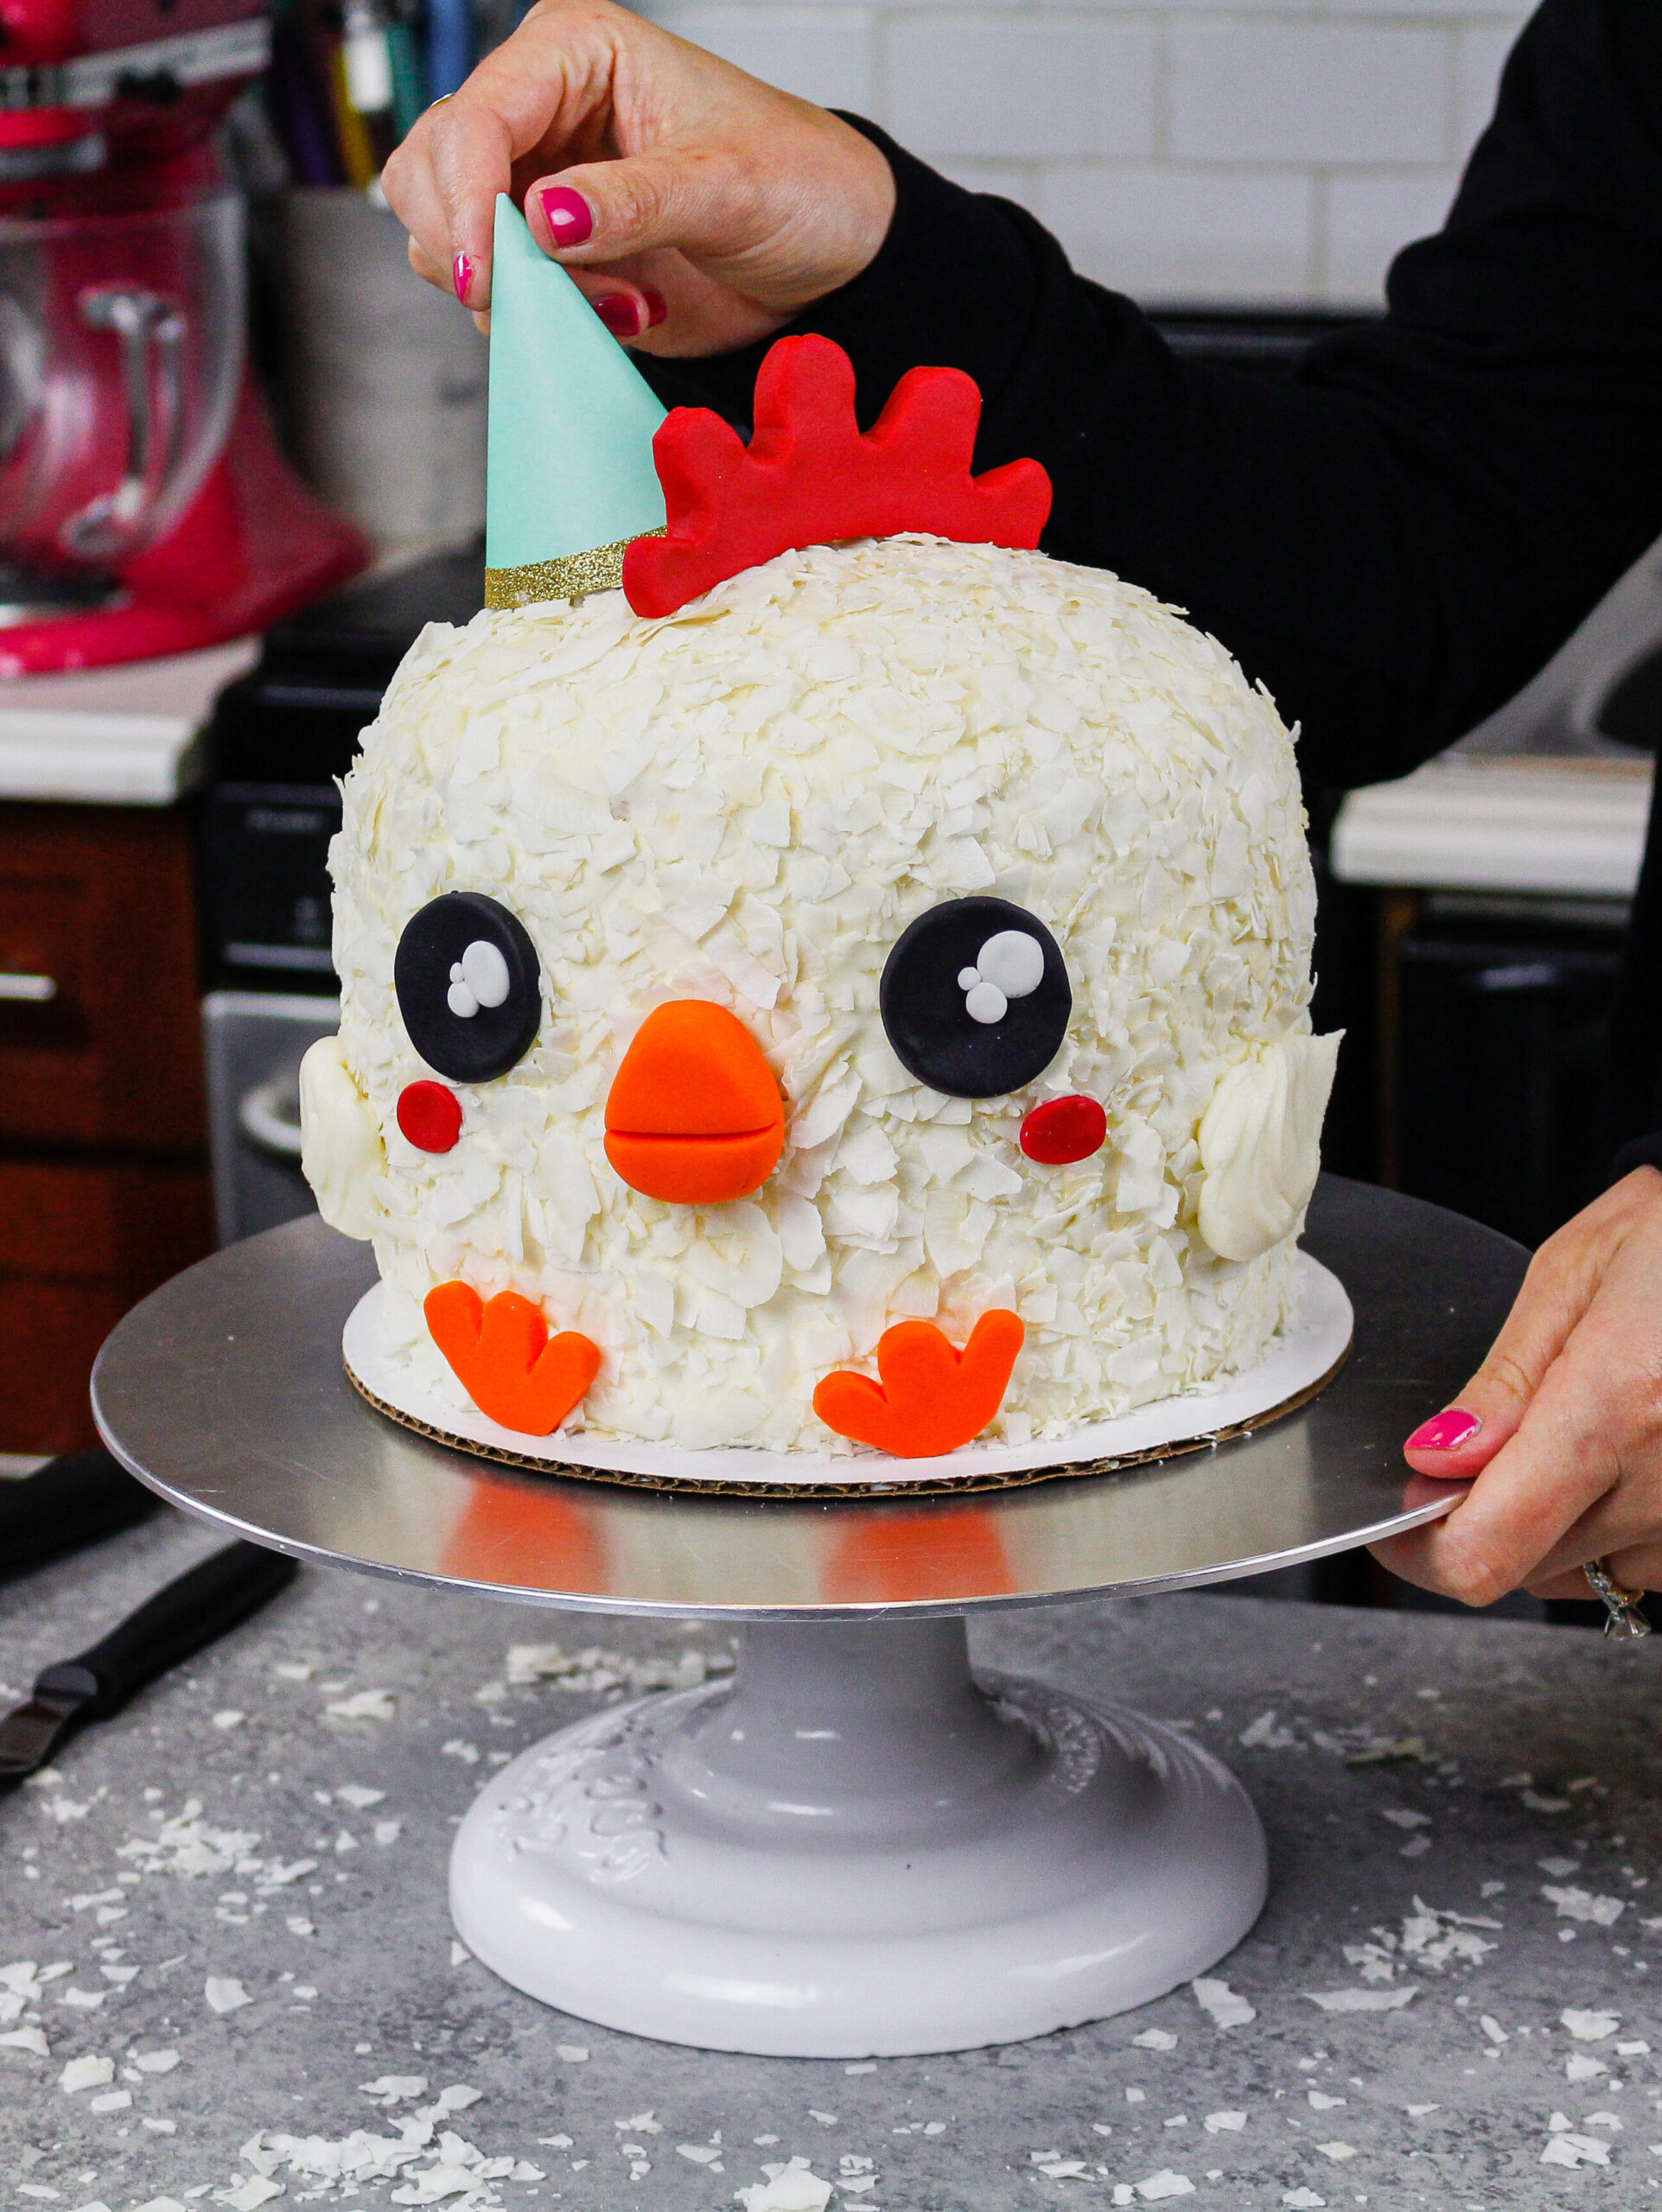 image of chelsey white placing a party hat on a spring chicken cake as part of her animal face series